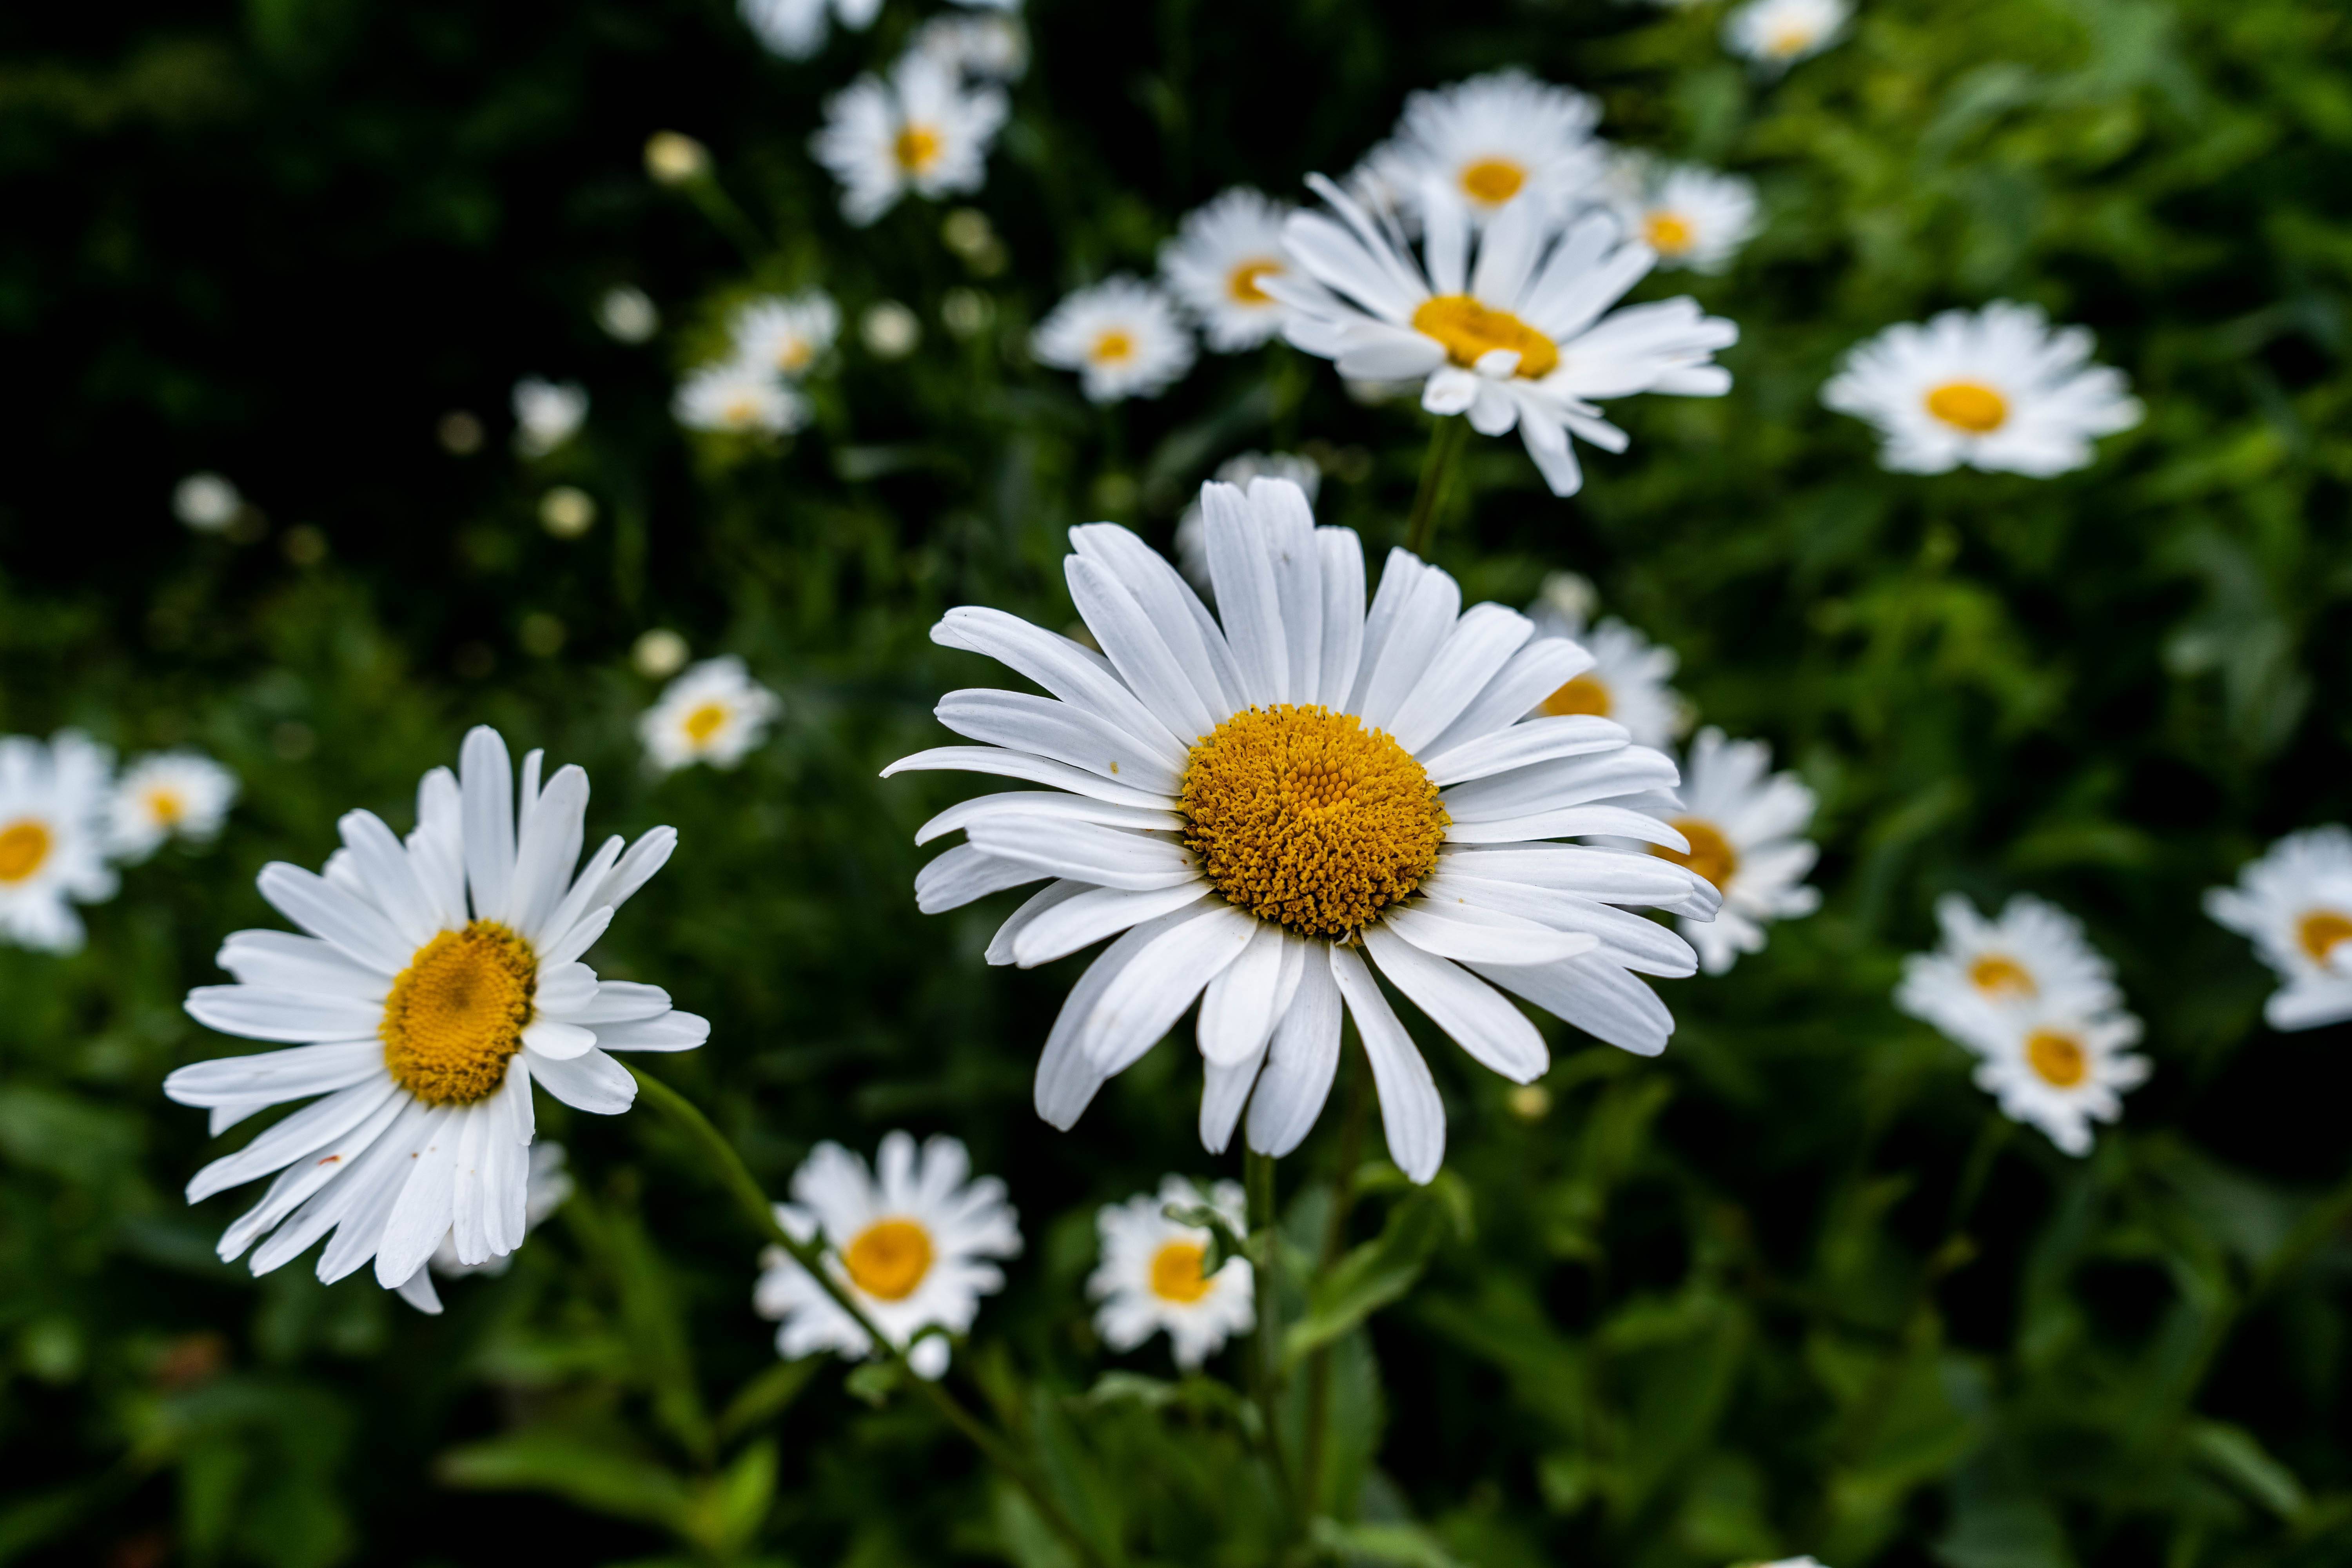 white flowers with dark-yellow center, green leaves and stems